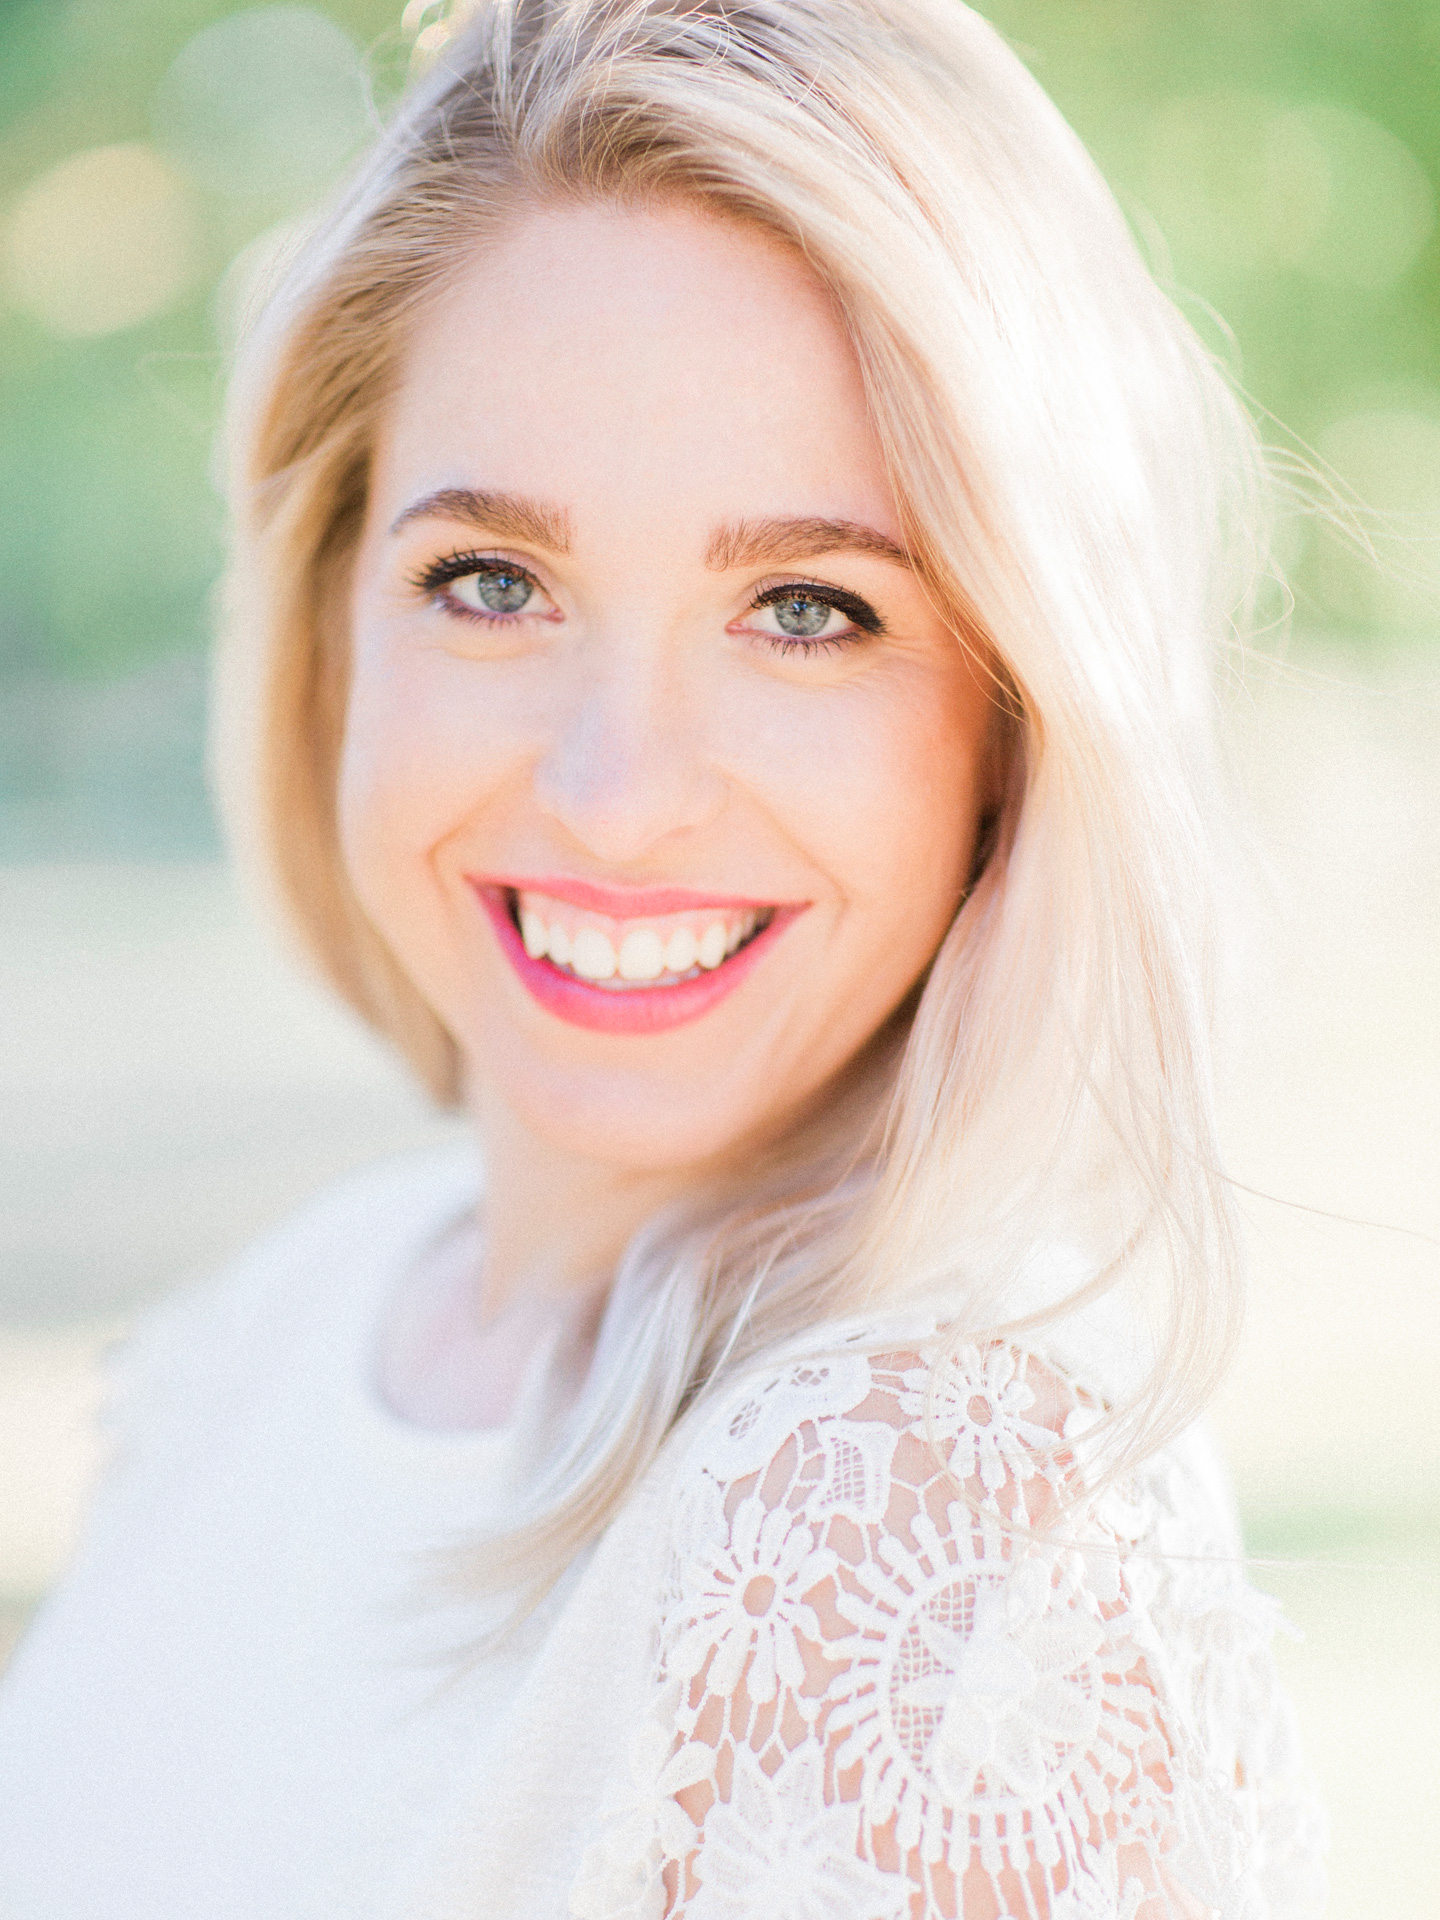 Headshot of gorgeous bride-to-be during Chicago engagement session by Love Tree Studios